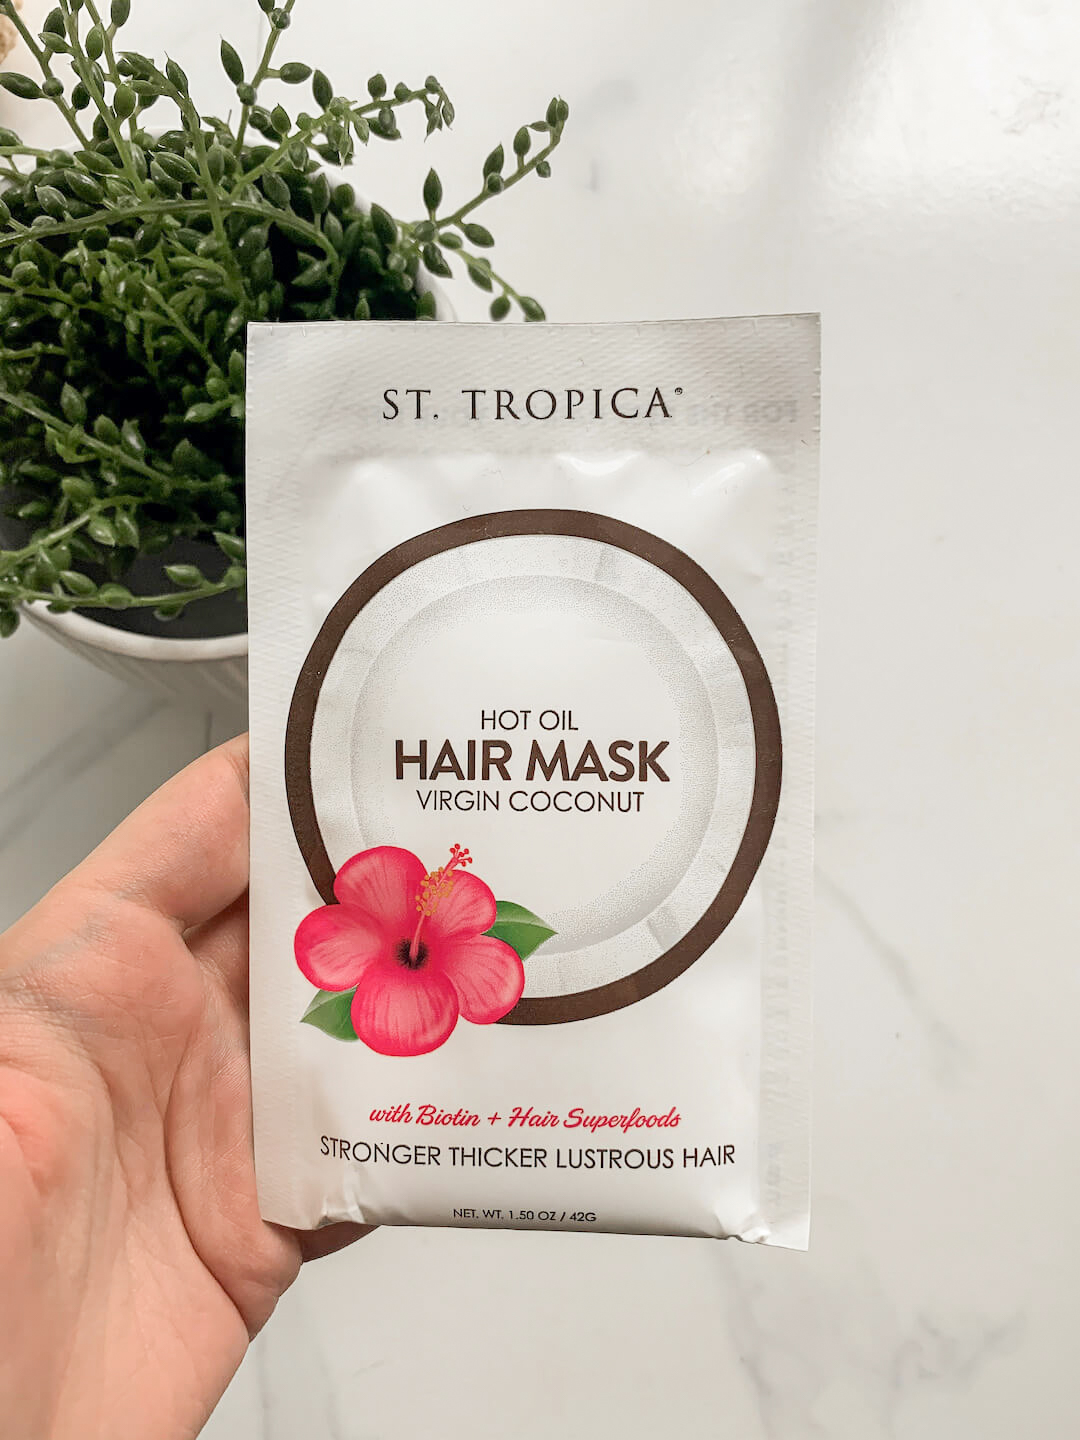 ST TROPICA Hot Oil Hair Mask Review